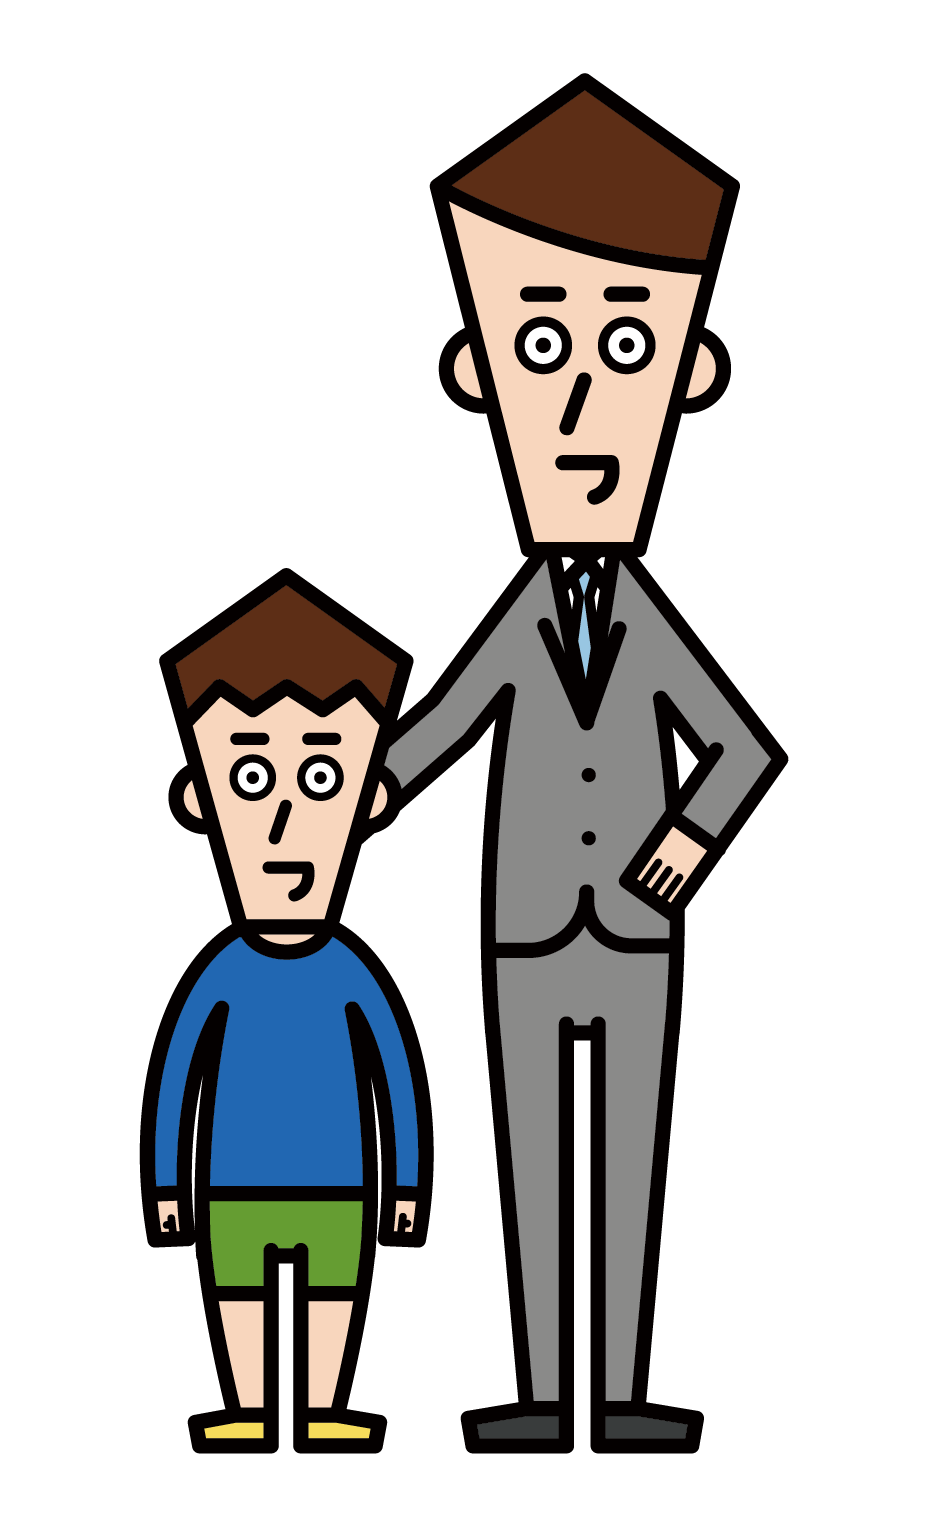 Illustration of a teacher and legal instructor (man)